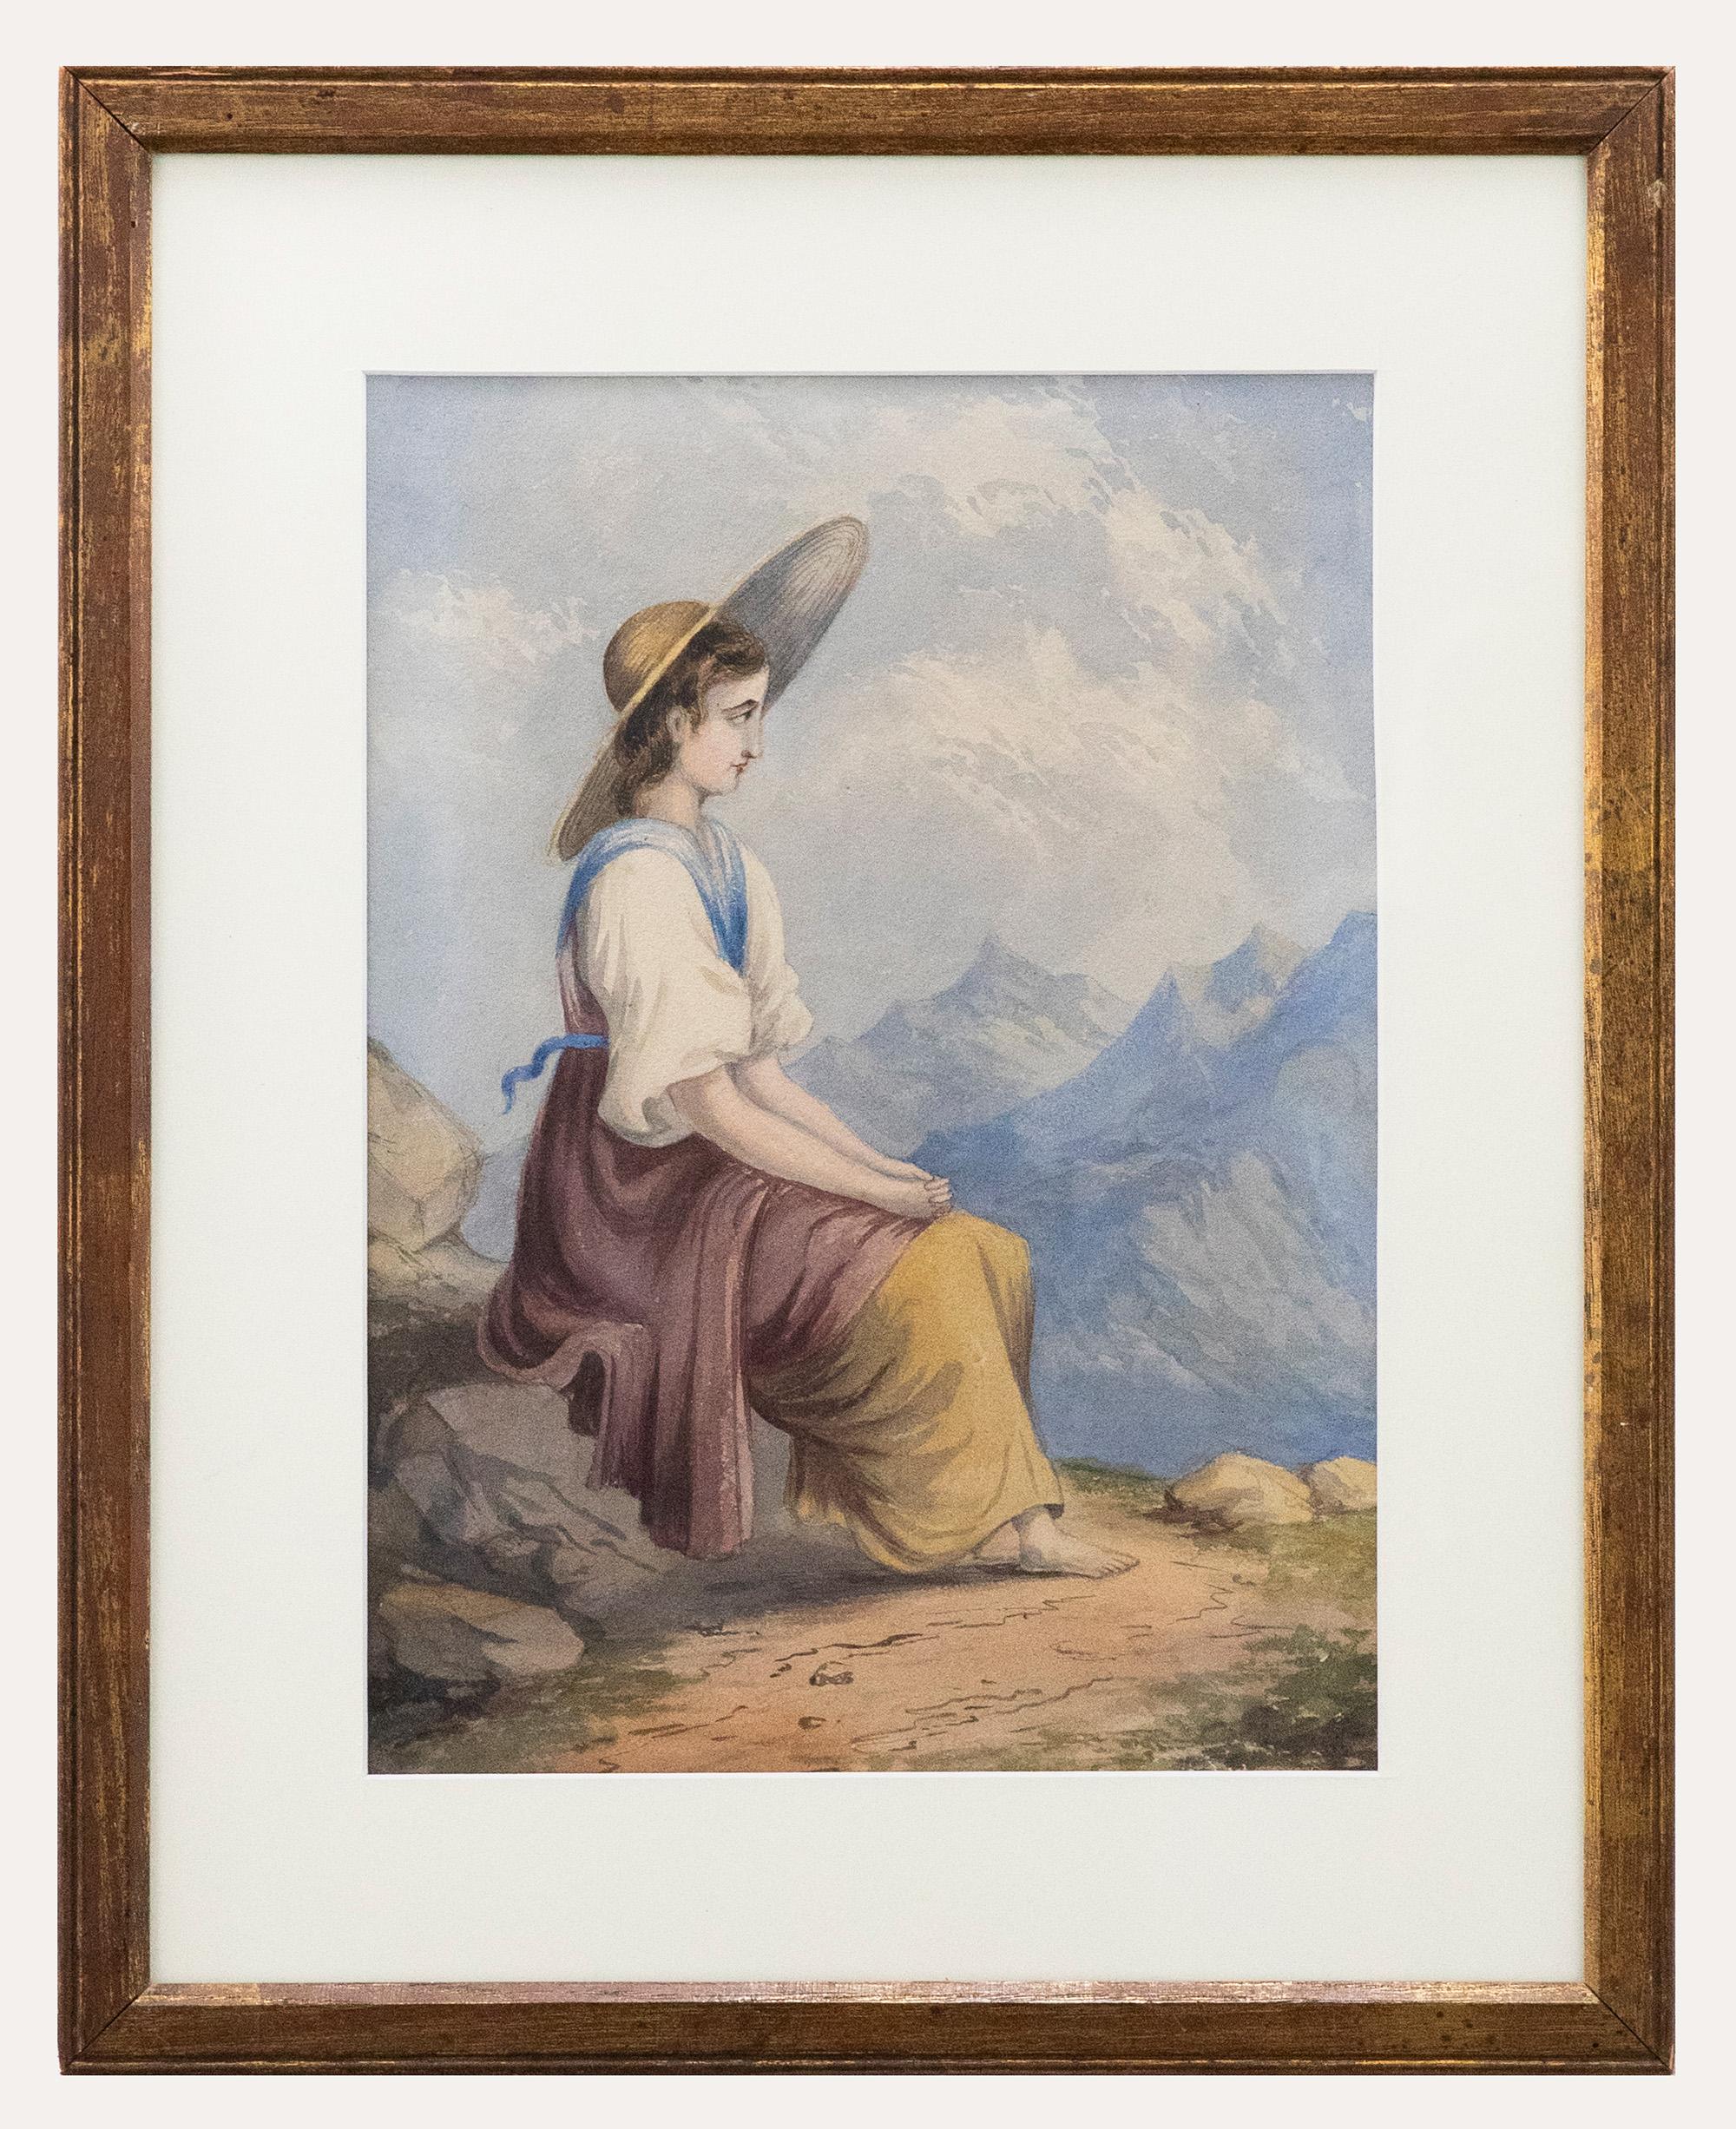 Unknown Portrait - Framed Mid 19th Century Watercolour - At the Cliffs Edge